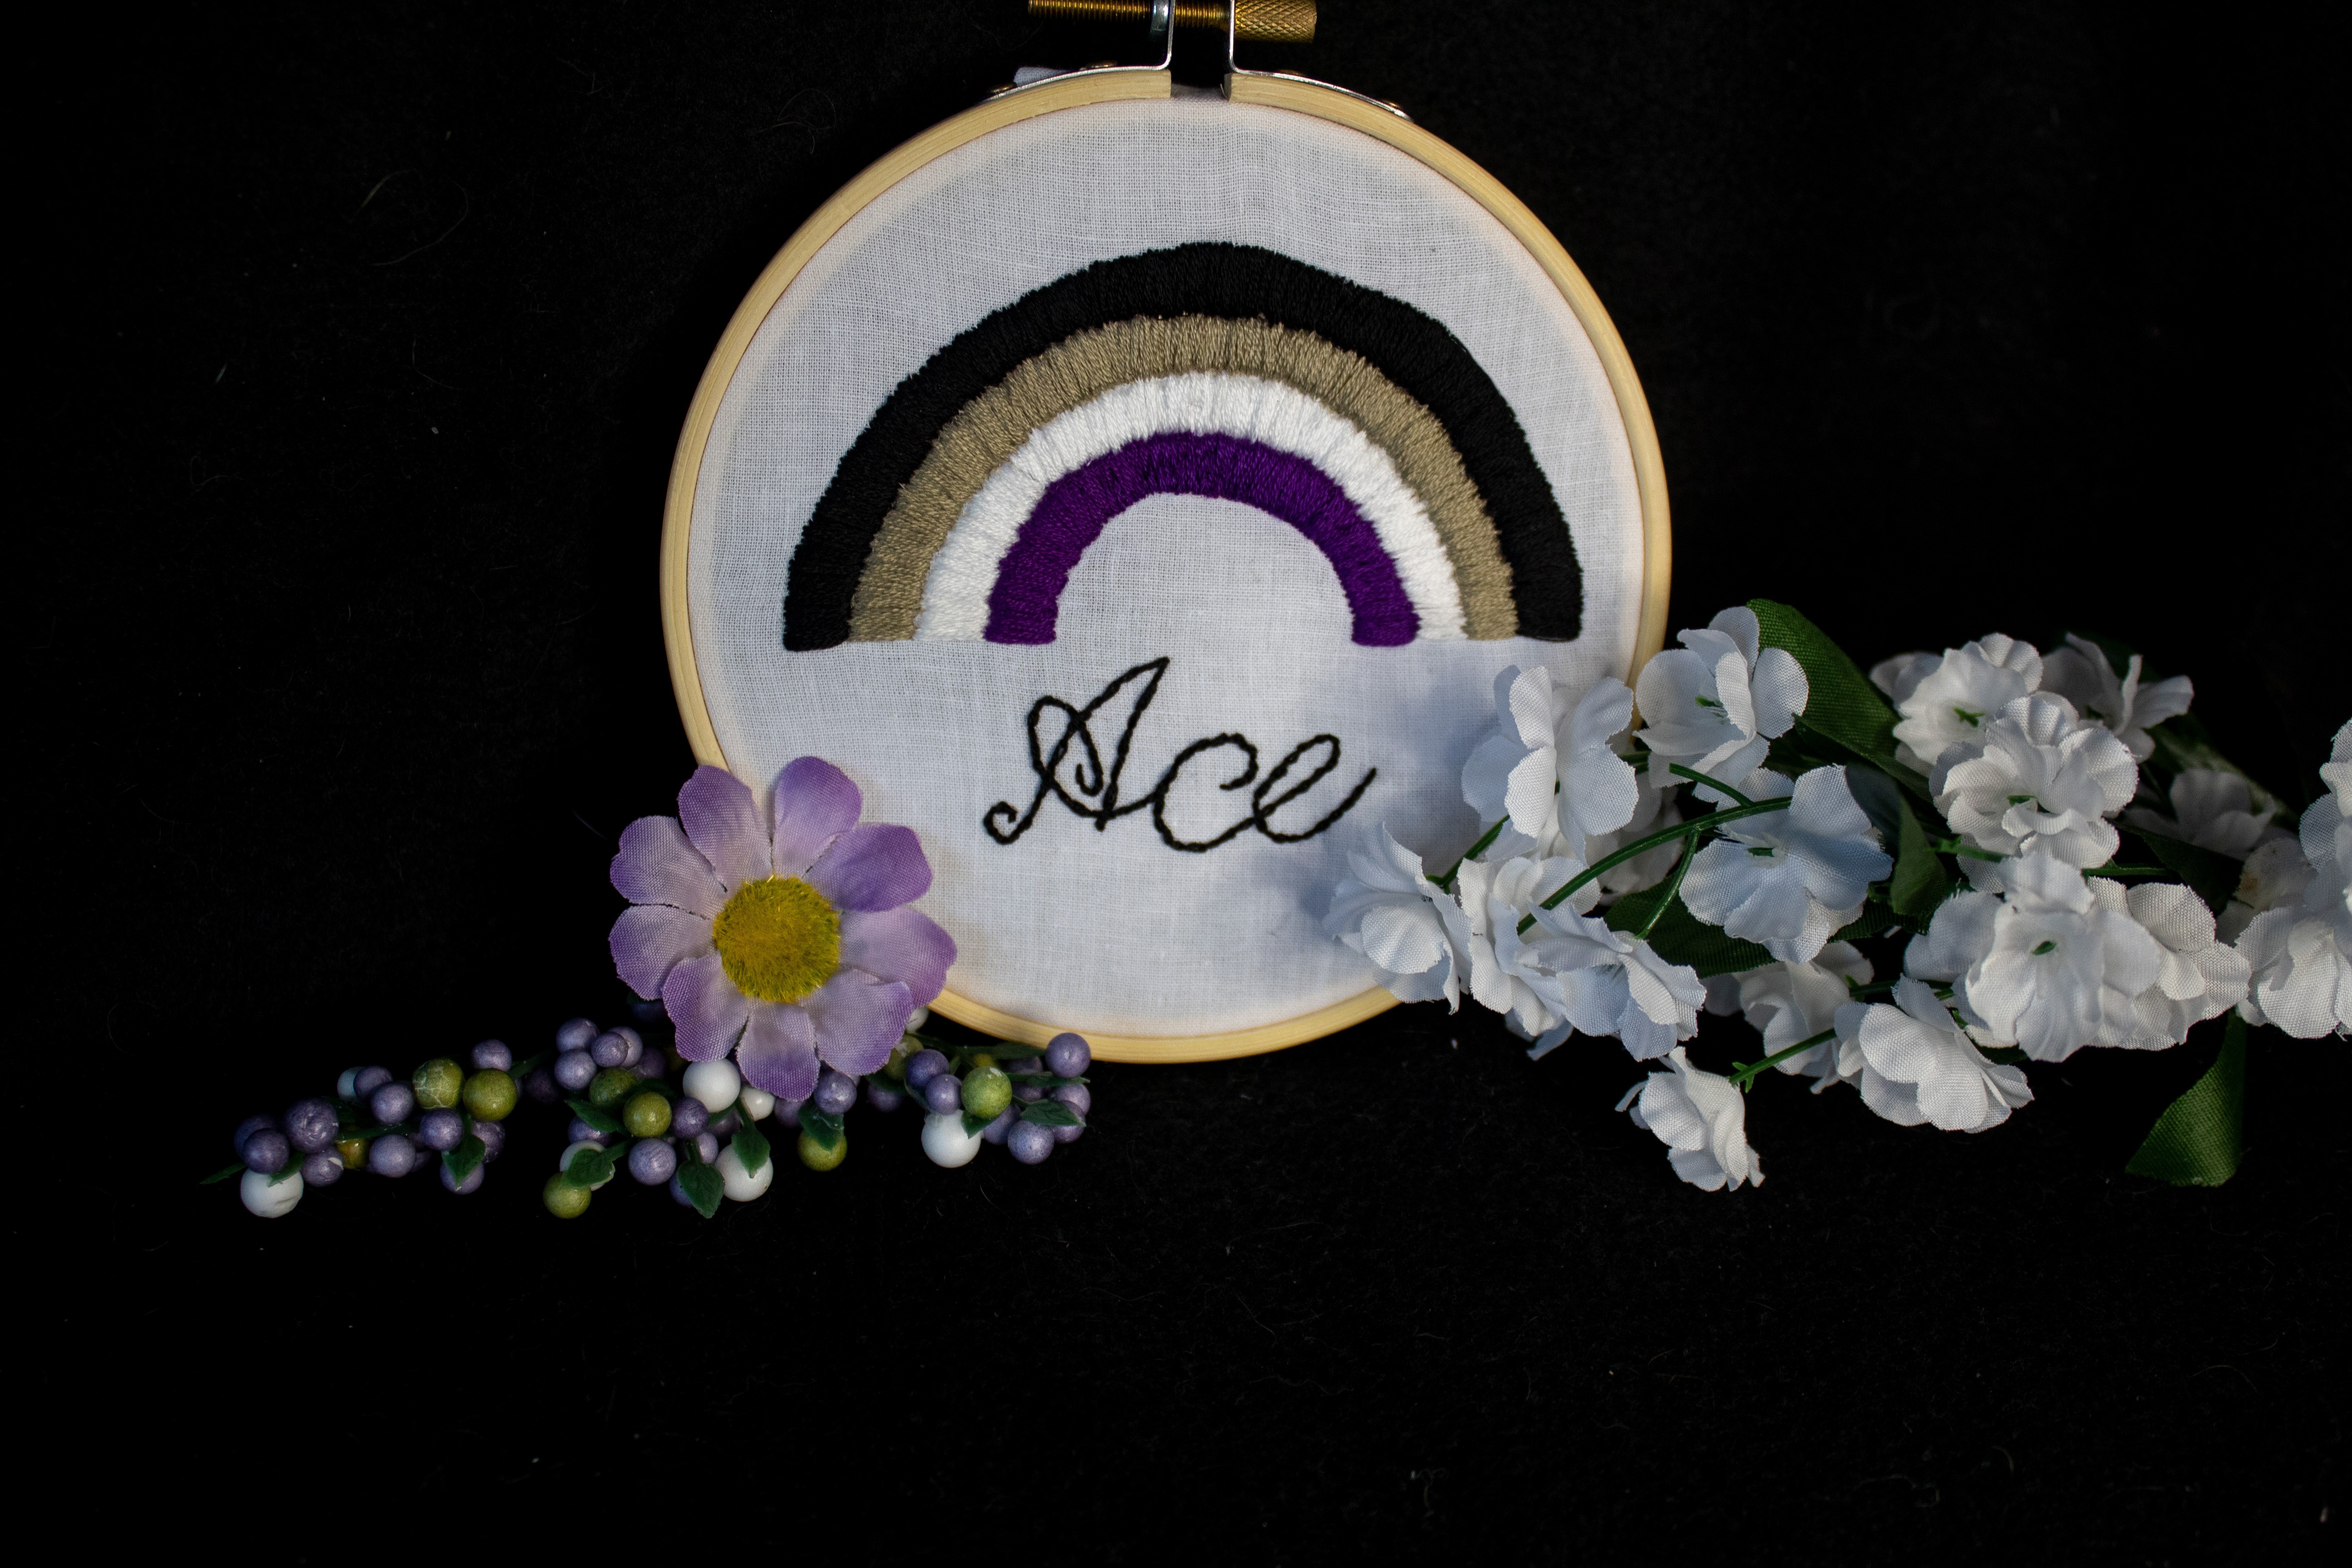 Product image of the ace ebroidery set against a black backdrop, with a sprig of white flowers resting on one side, and a sprif og green and purple buds and one purple flower on the other side